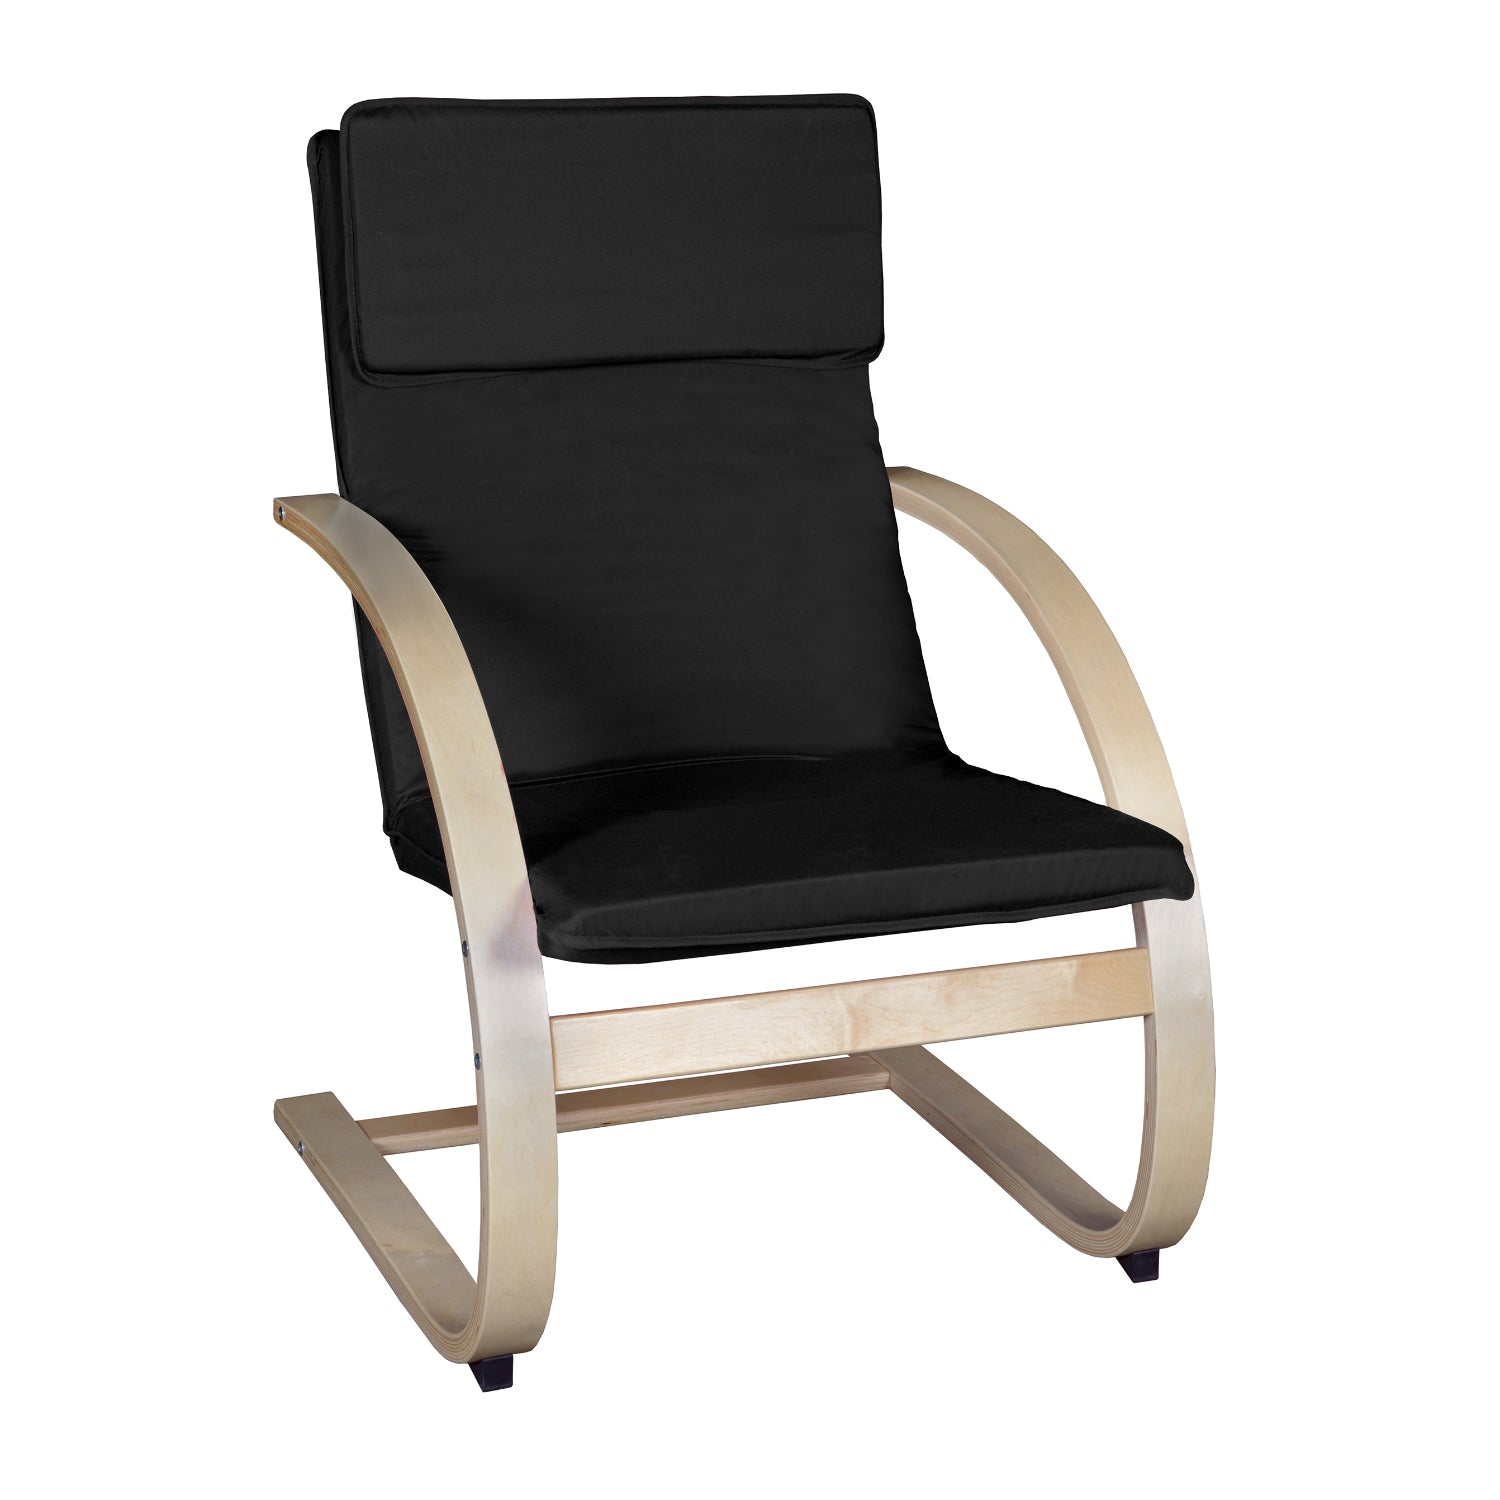 Niche Mia Bentwood Reclining Chair with Natural Frame Finish, Black  Upholstery